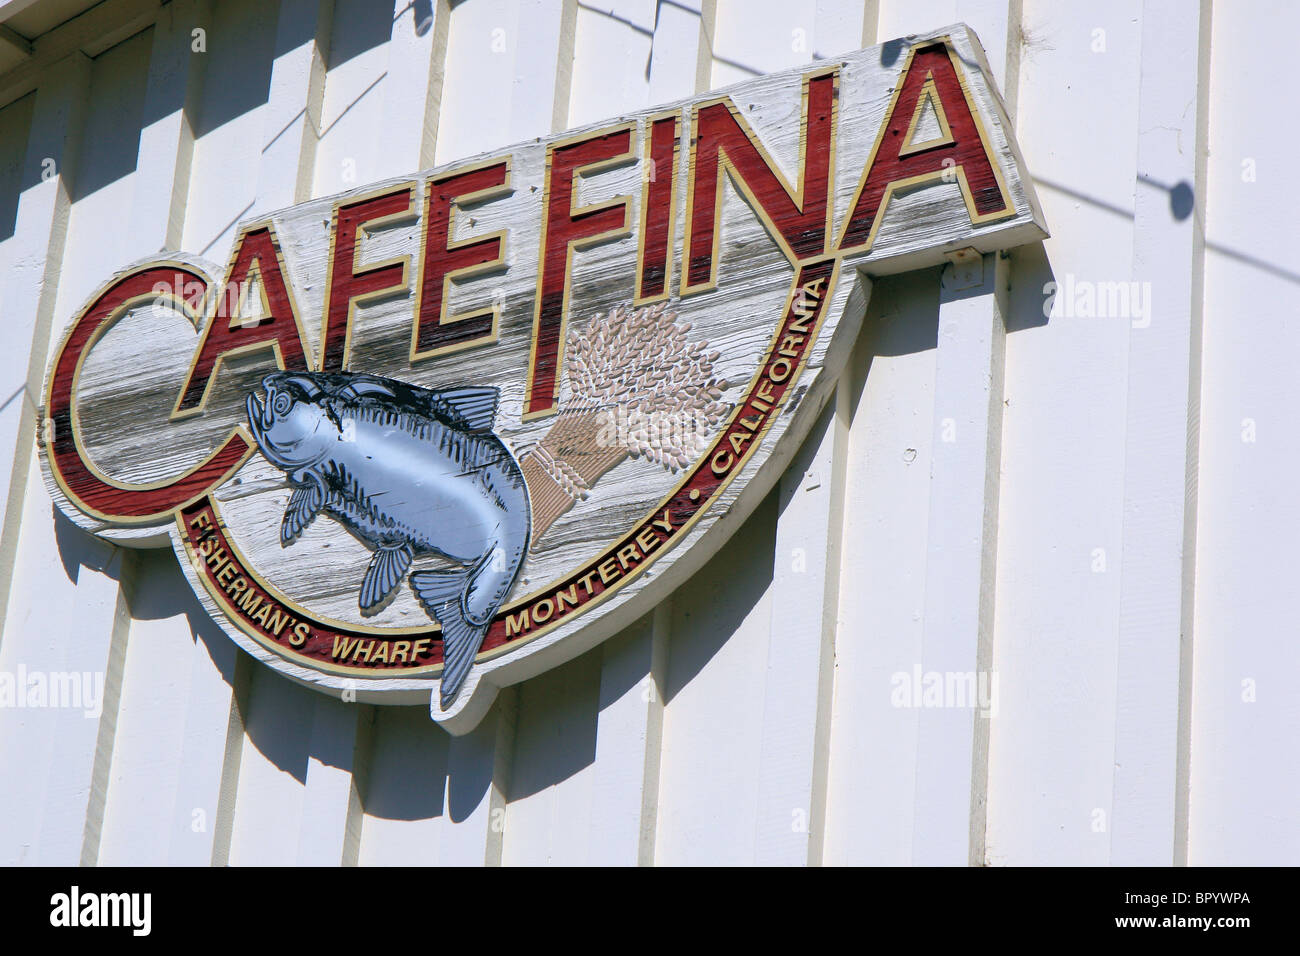 The Cafe Fina sign, restaurant on Fisherman's wharf, Monterey, California, United States of America Stock Photo